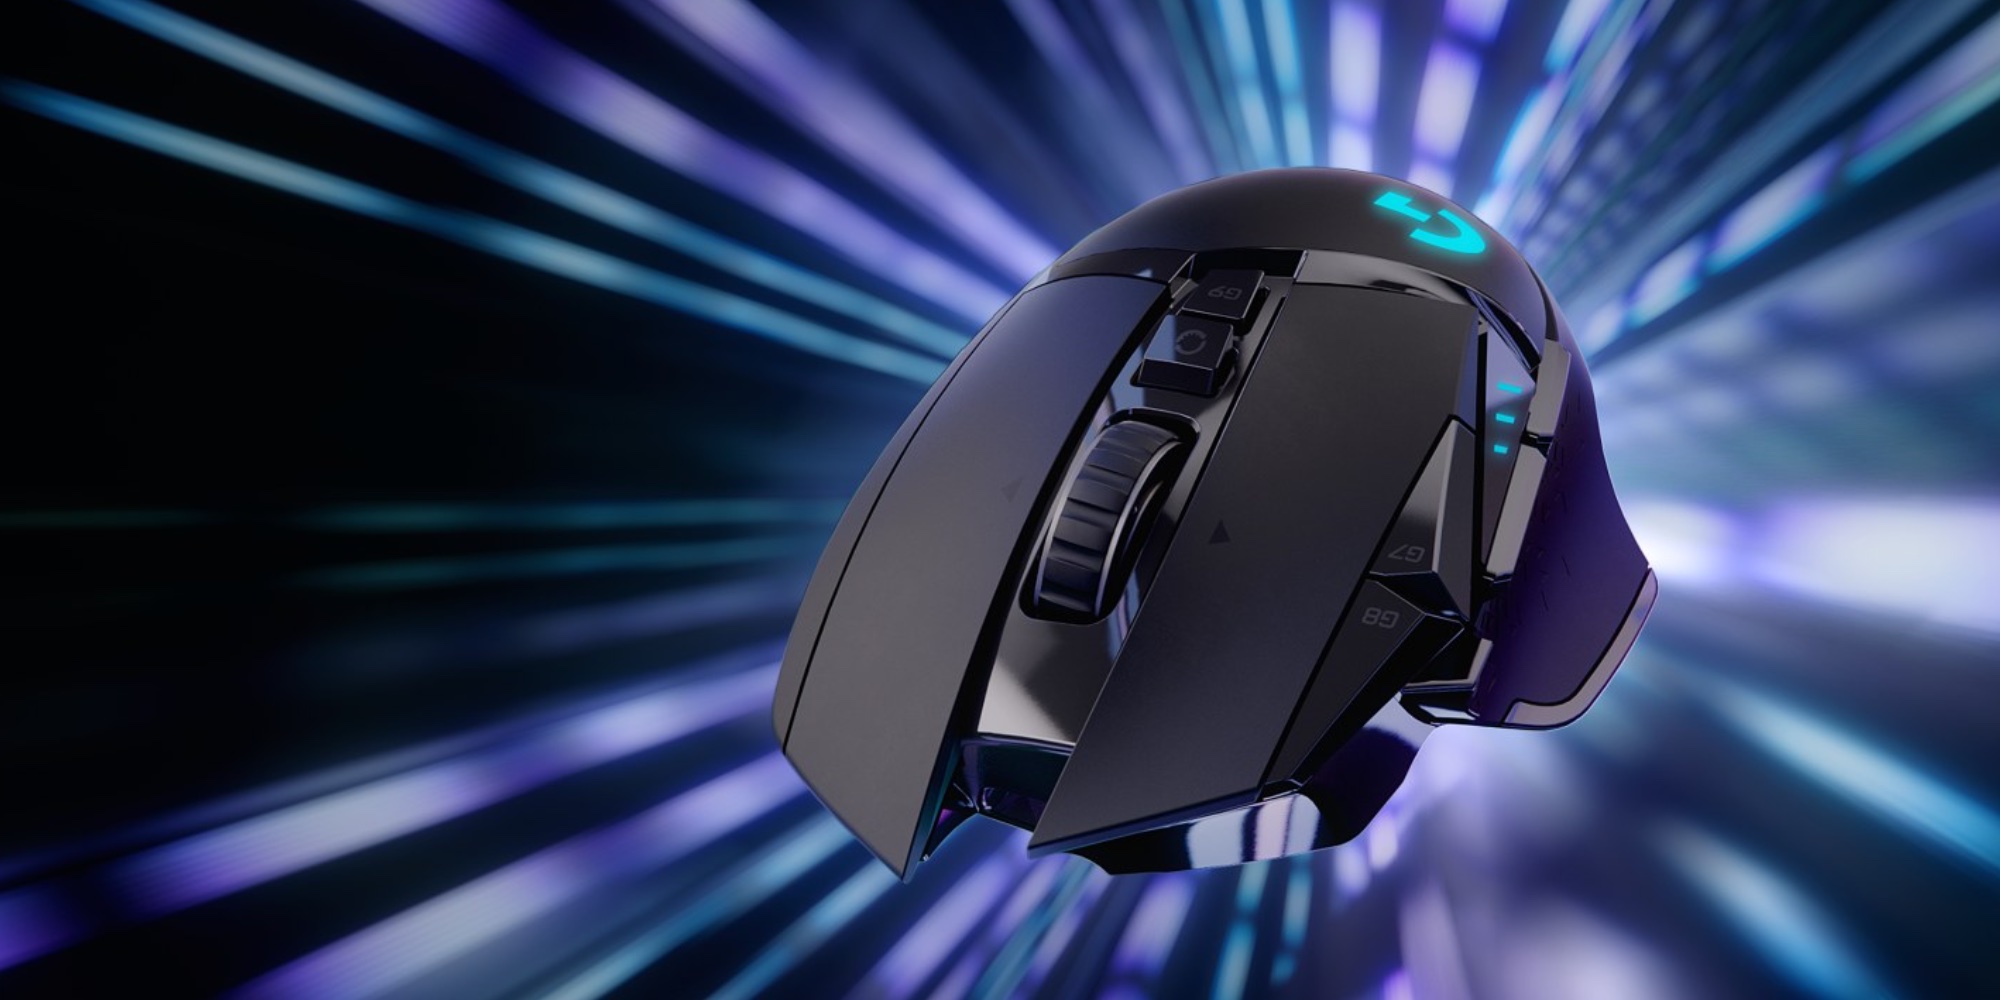 Logitech's G502 LIGHTSPEED wireless gaming mouse falls 50% to $75